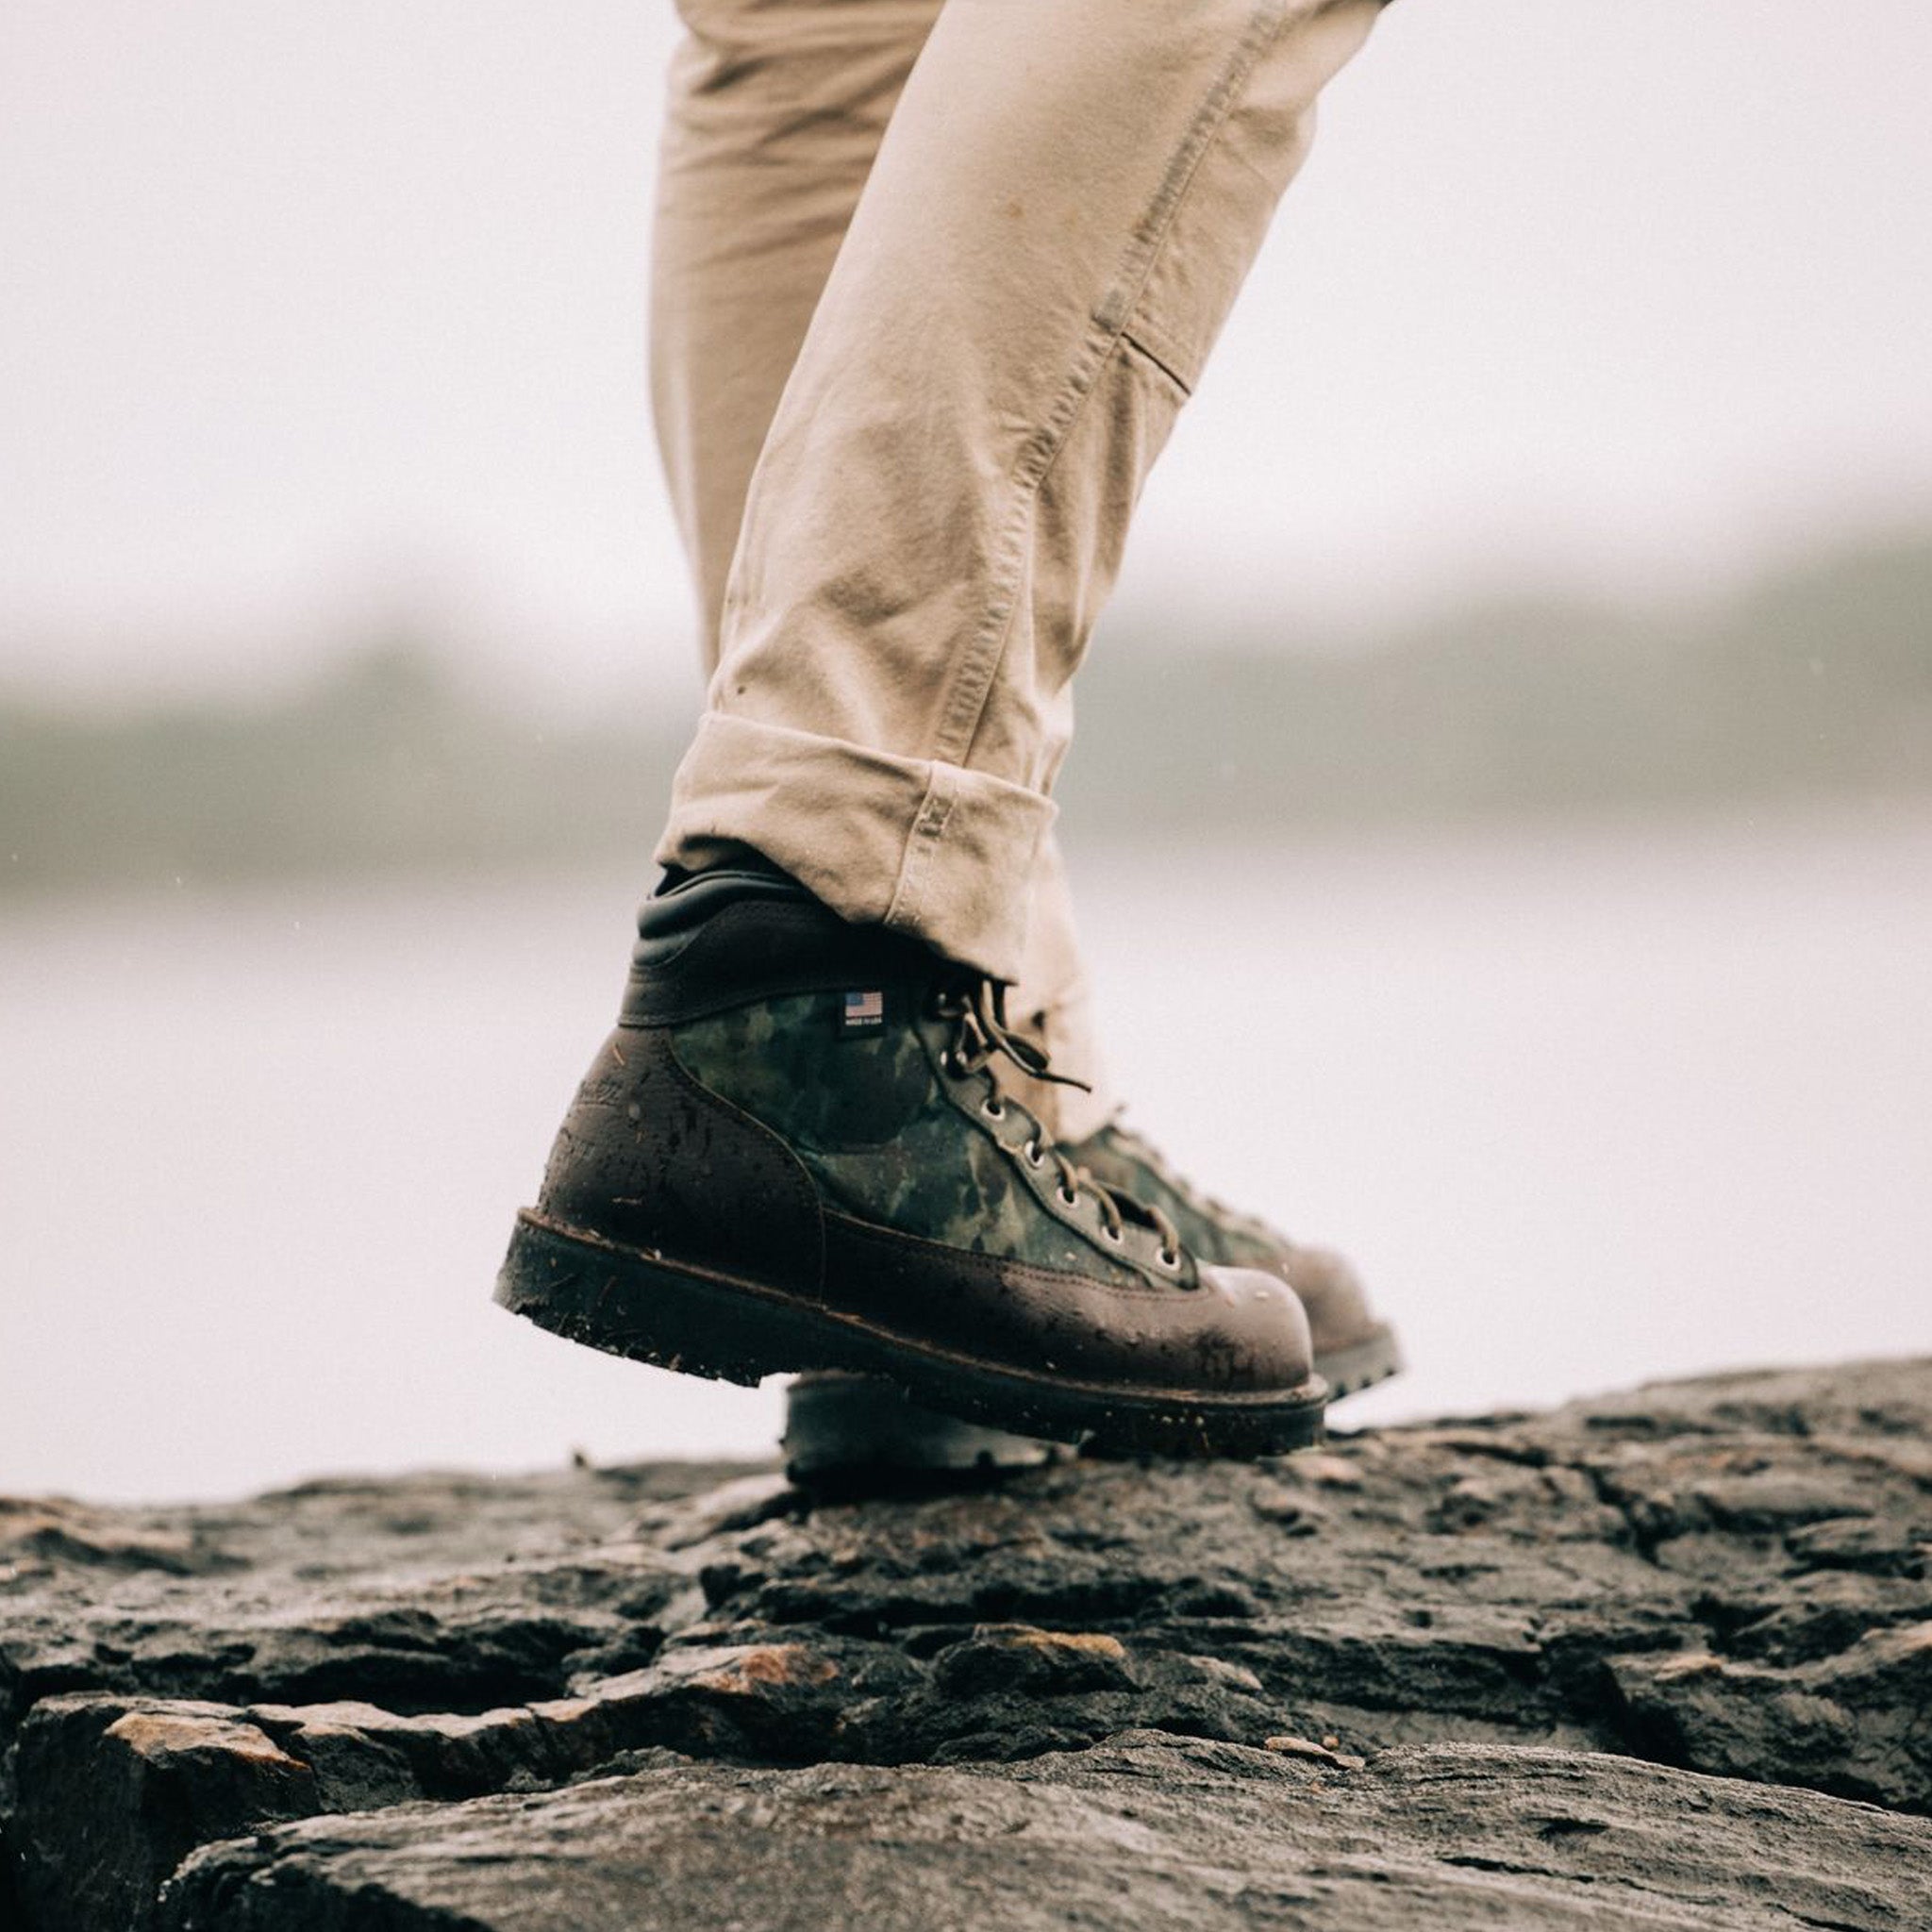 The Danner Ridge Mens Boot in Painted Camo | Taylor Stitch x Danner